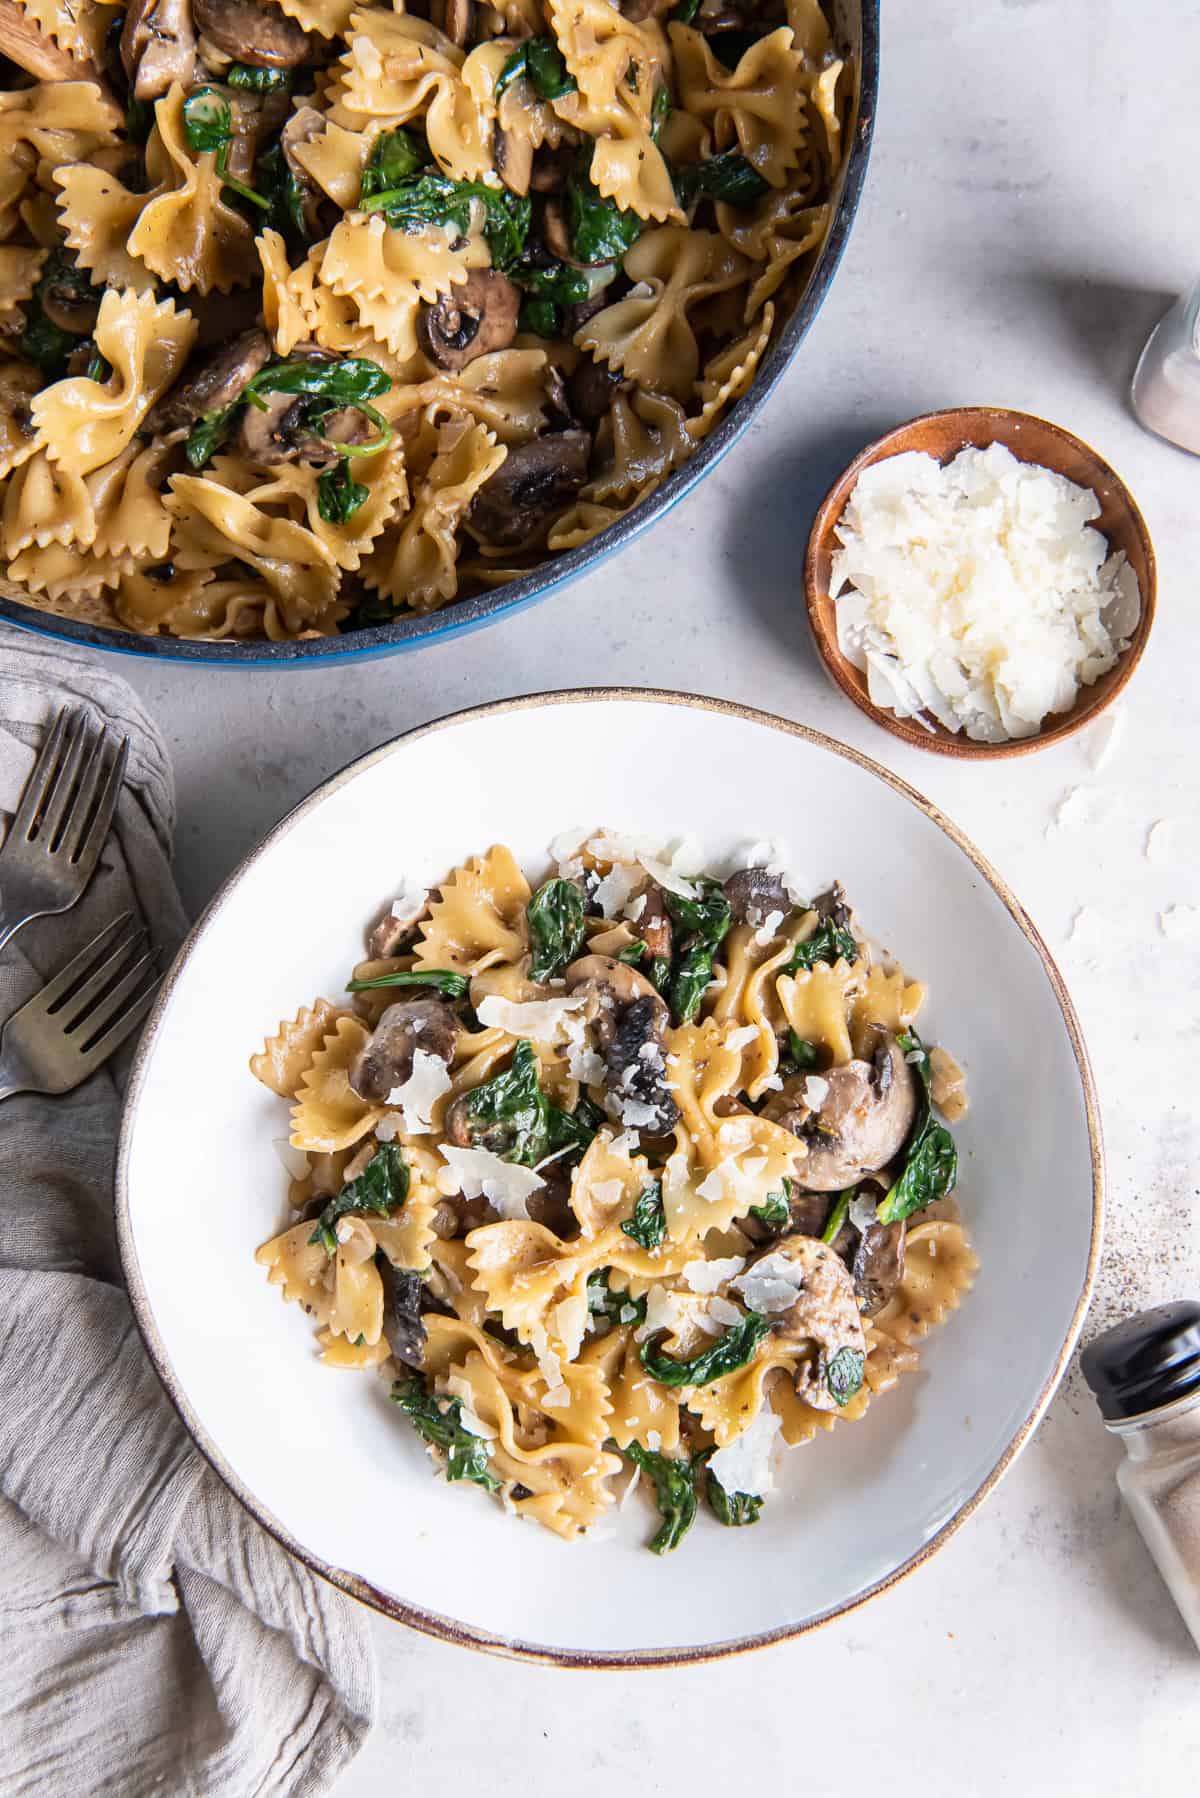 A blue skillet and white bowl filled with mushroom spinach pasta.